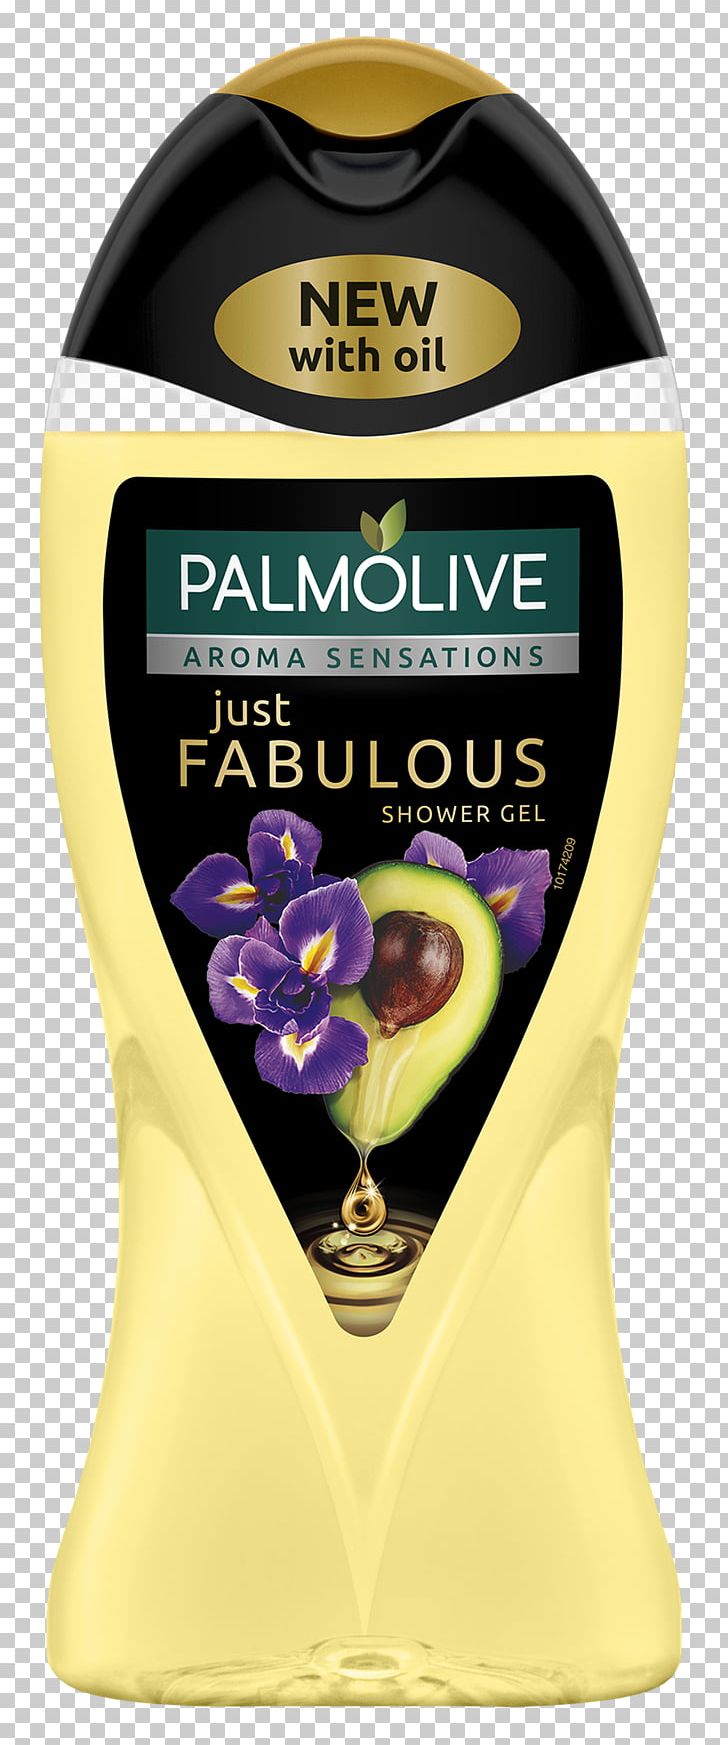 Palmolive Shower Gel TechStyle Fashion Group Oil PNG, Clipart, Aroma Compound, Bathing, Colgate, Colgate Palmolive, Cosmetics Free PNG Download